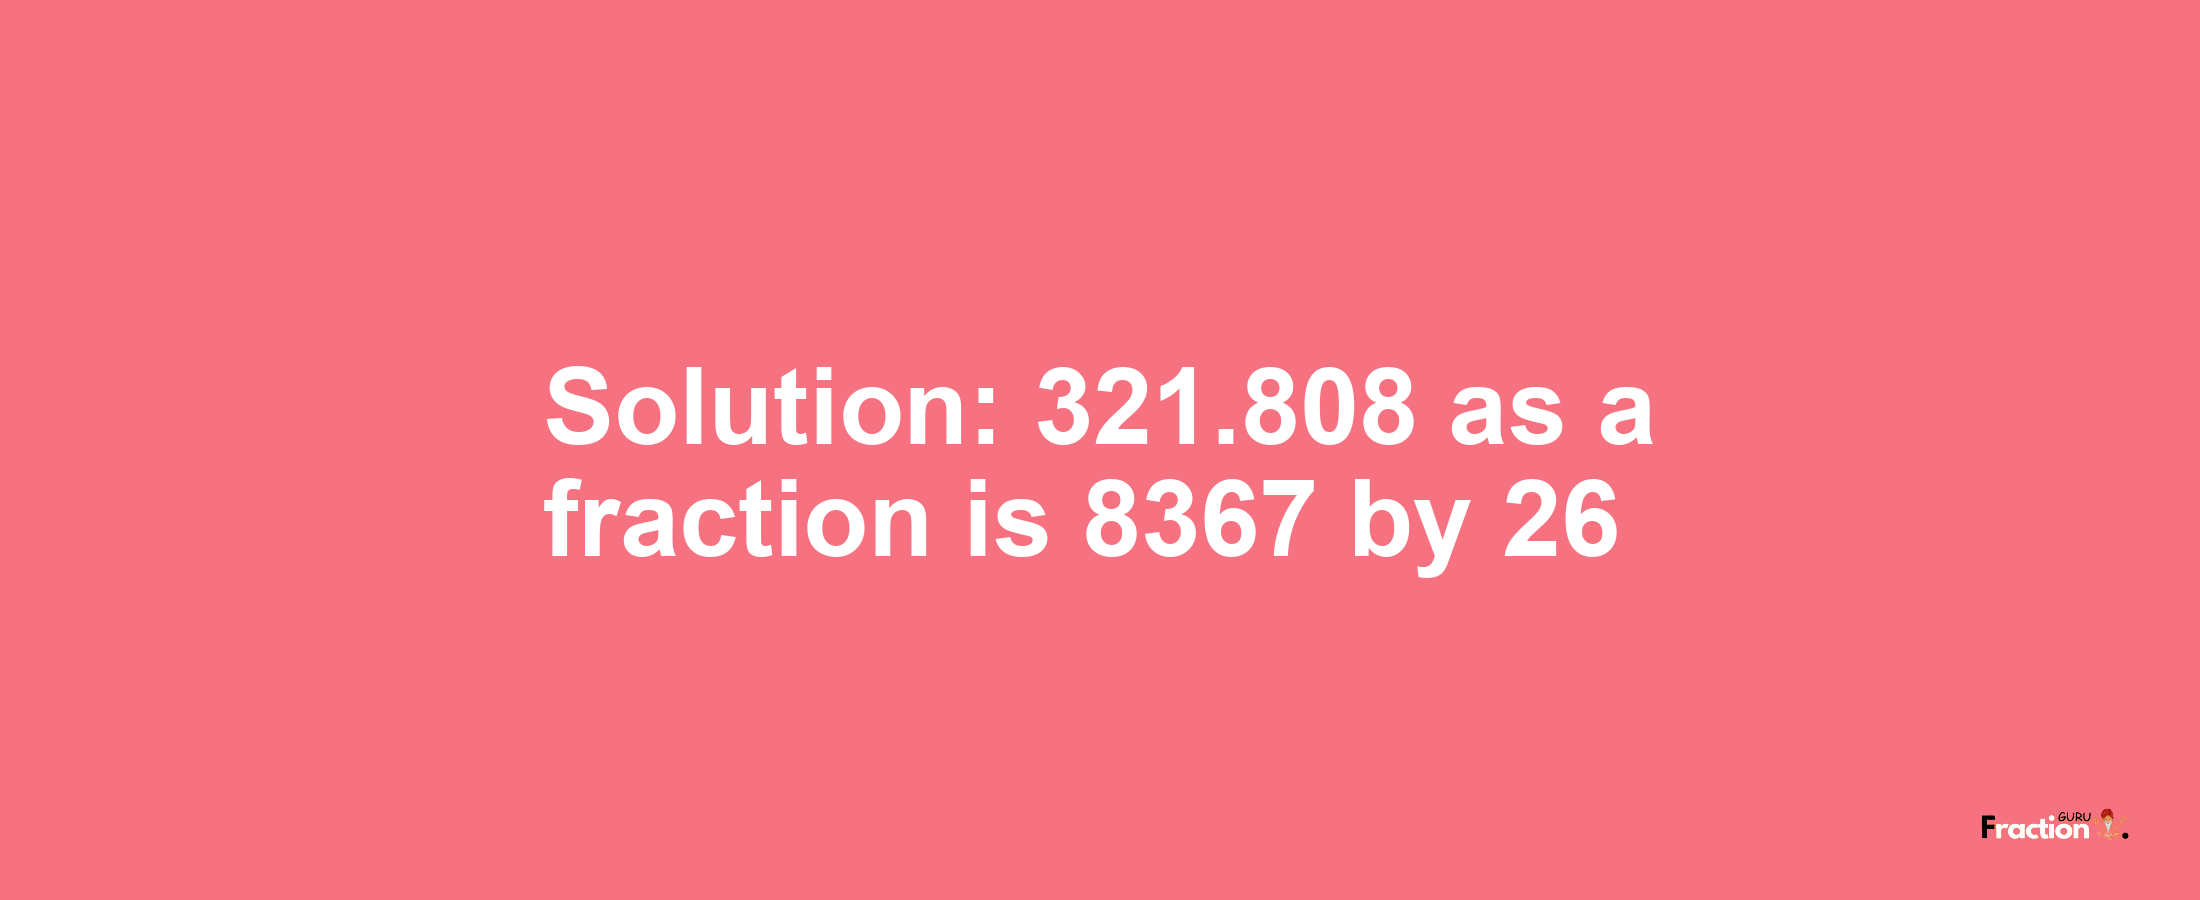 Solution:321.808 as a fraction is 8367/26